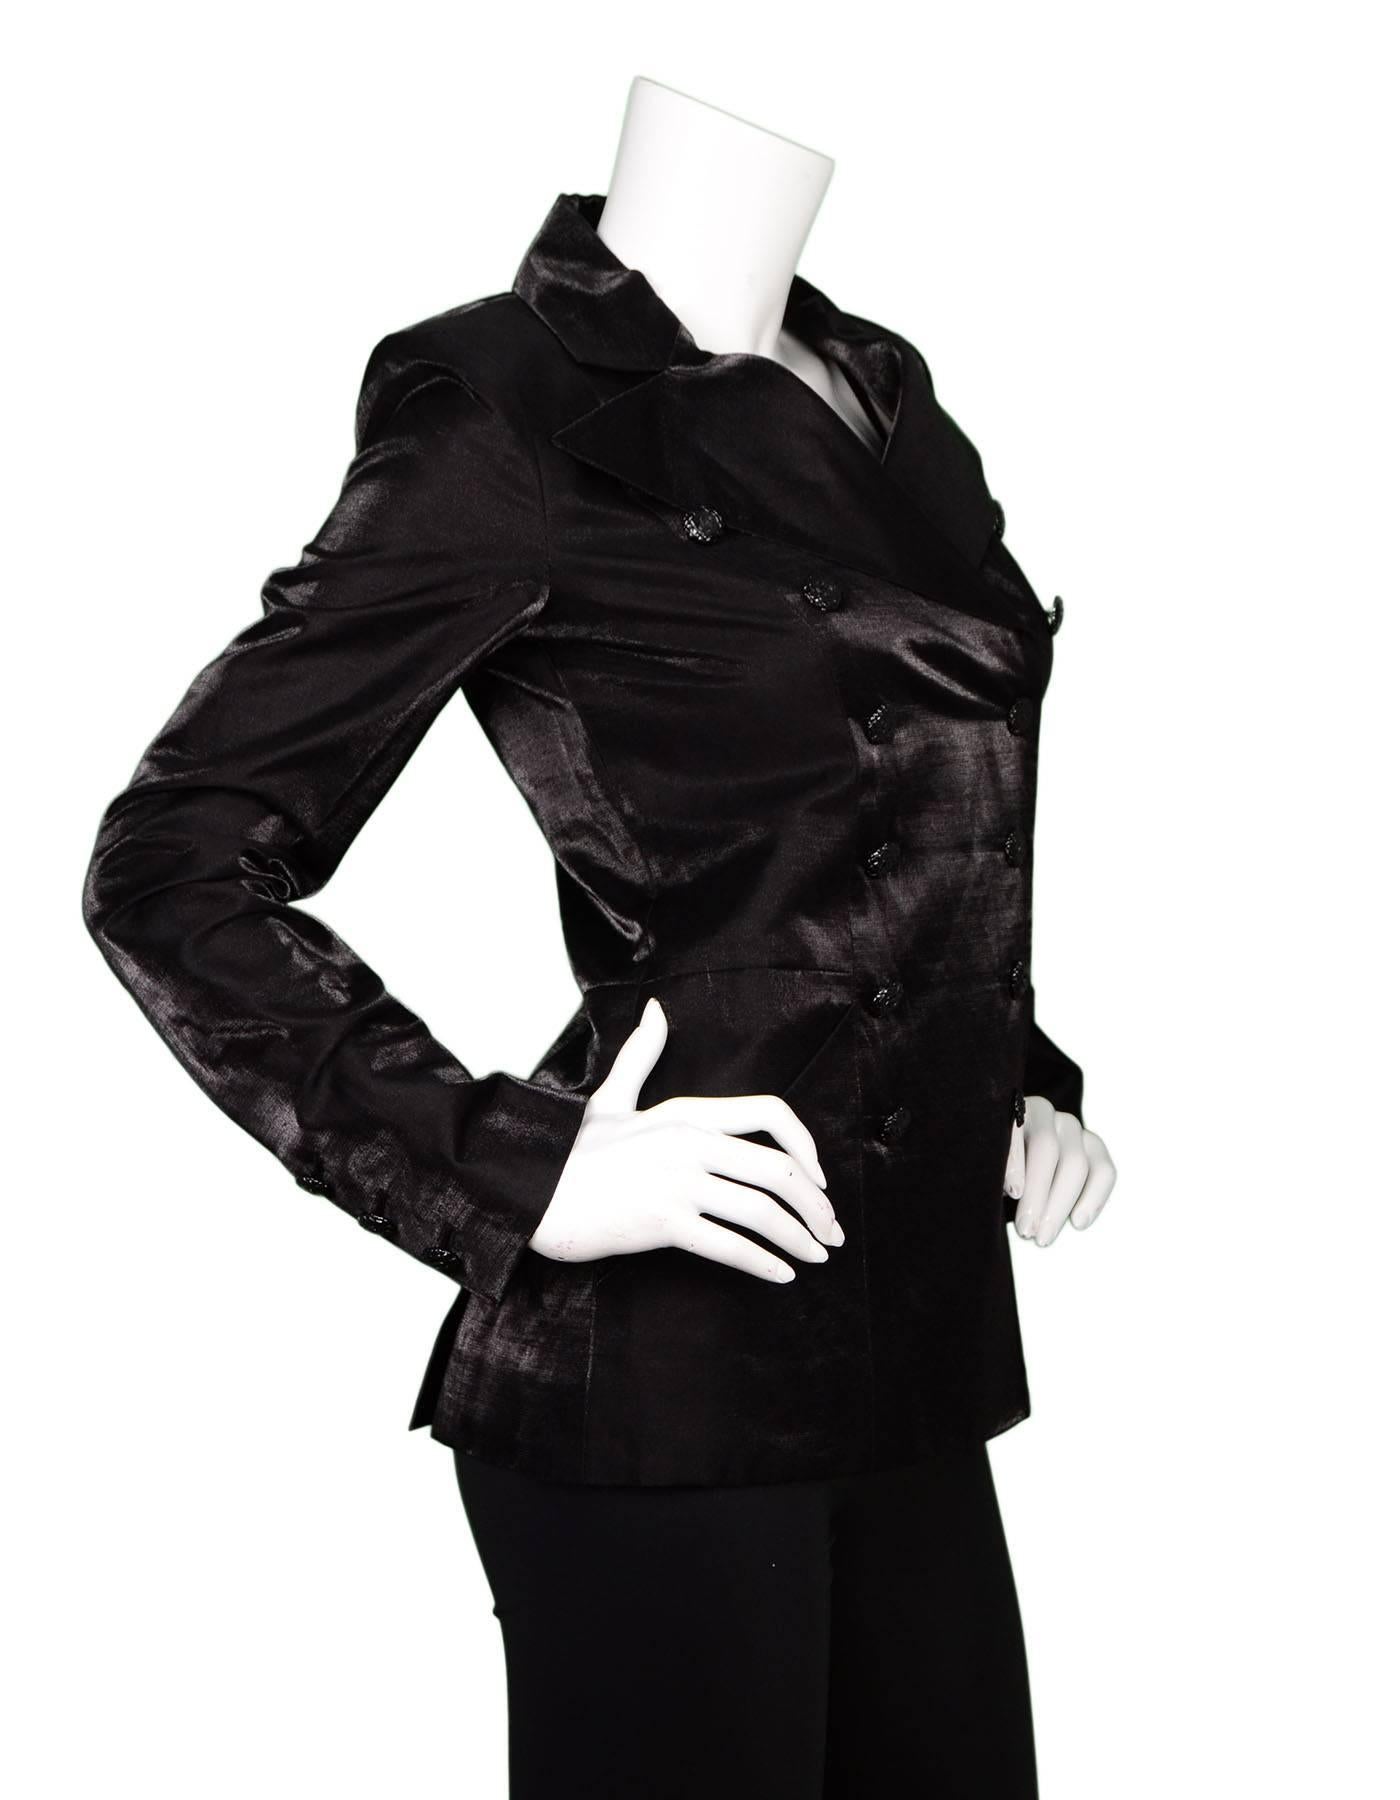 Chanel Black Iridescent Tuxedo Jacket Sz 34
Features peak lapels and double-breast closure

Made In: France
Year Of Production: 2009 Cruise
Color: Black
Composition: 85% Linen, 15% Nylon
Lining: Black100% Silk
Closure/Opening: Front